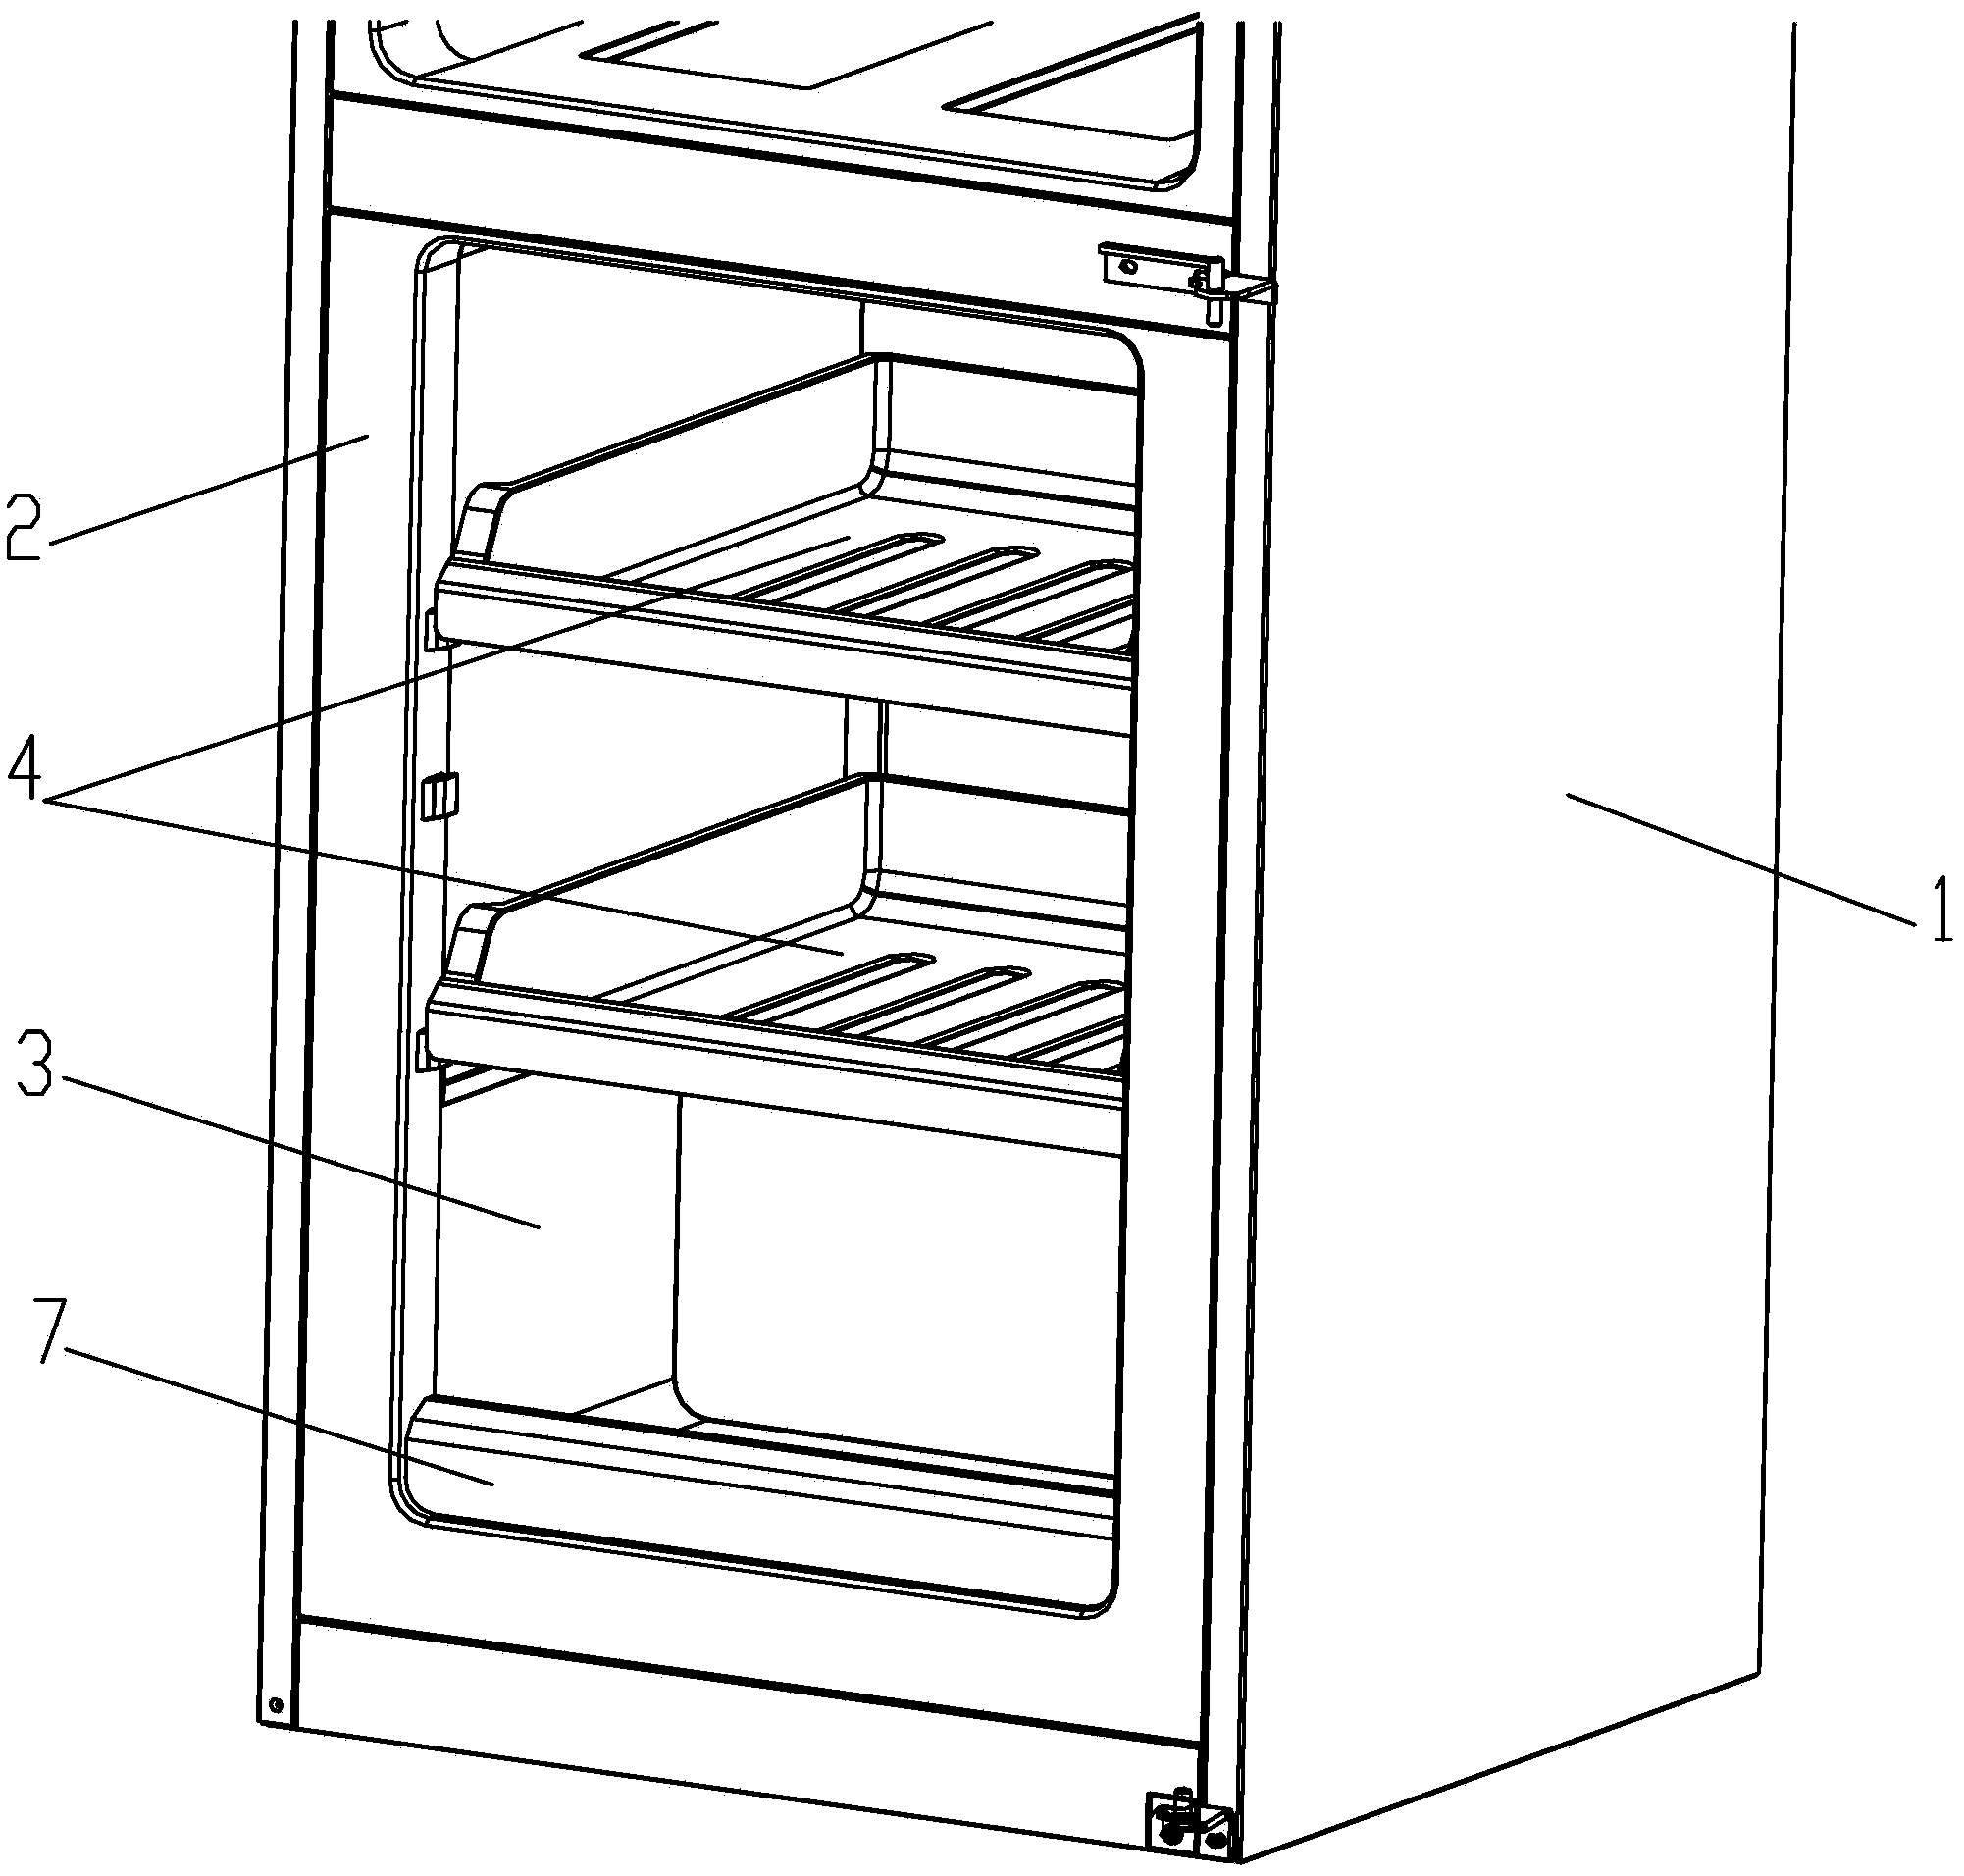 Freezing chamber structure of refrigerator